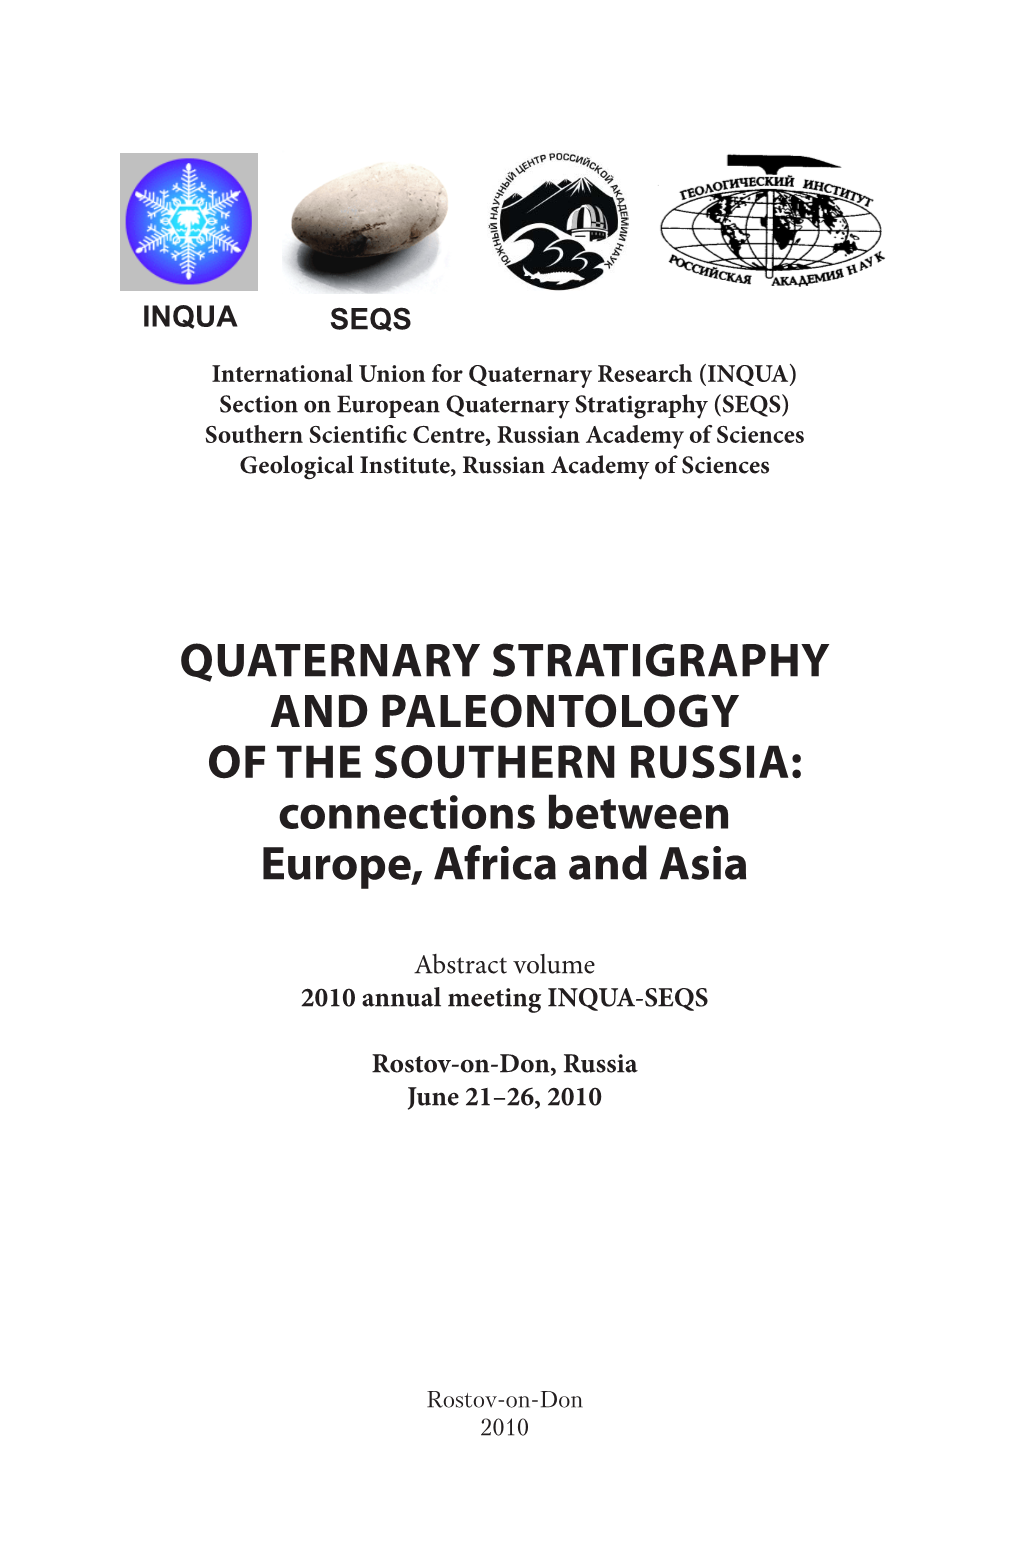 Quaternary Stratigraphy and Paleontology of the Southern Russia: Connections Between Europe, Africa and Asia